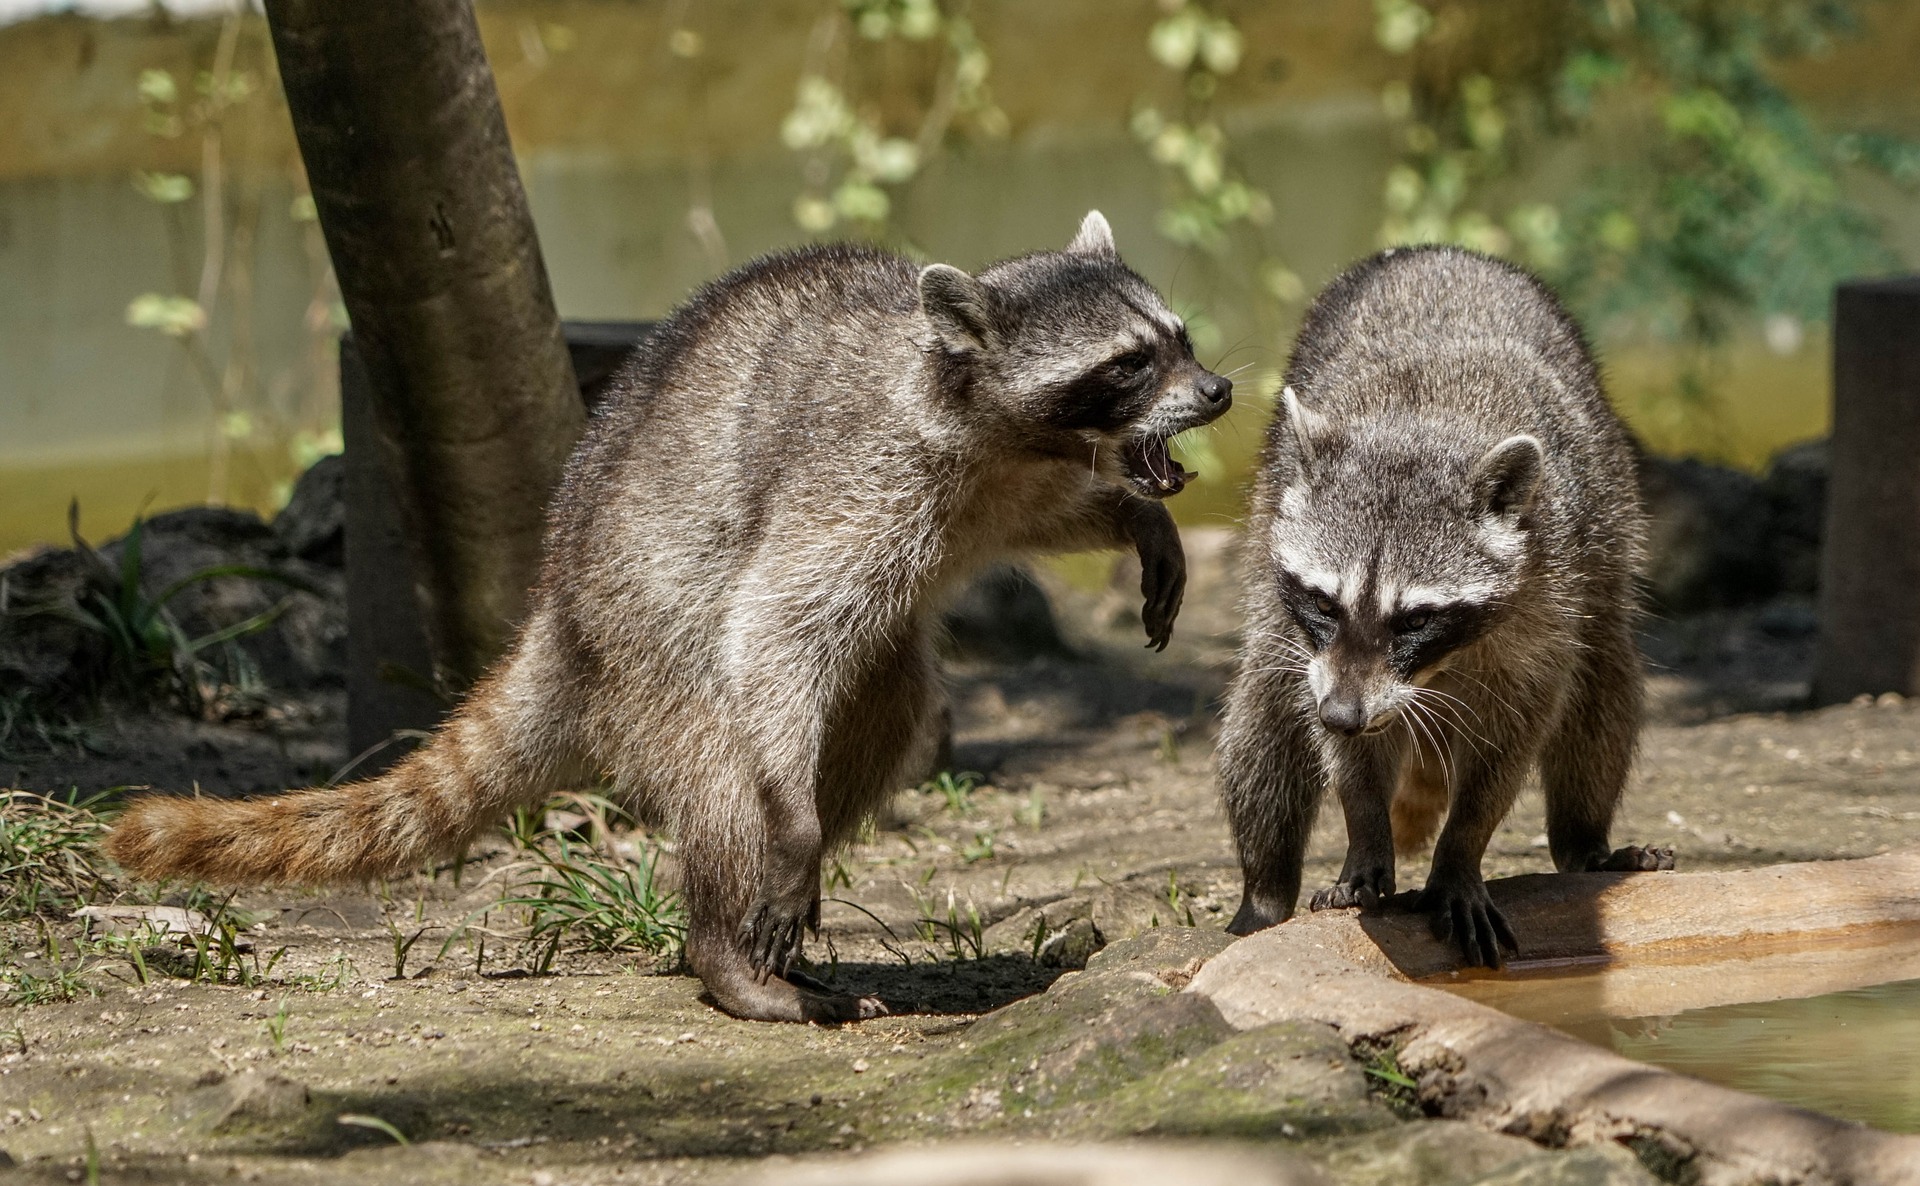 Two raccoons near a tree and the water's edge, one on the left standing on its hind legs with mouth open, teeth showing, the second on the right on all four legs and looking down.